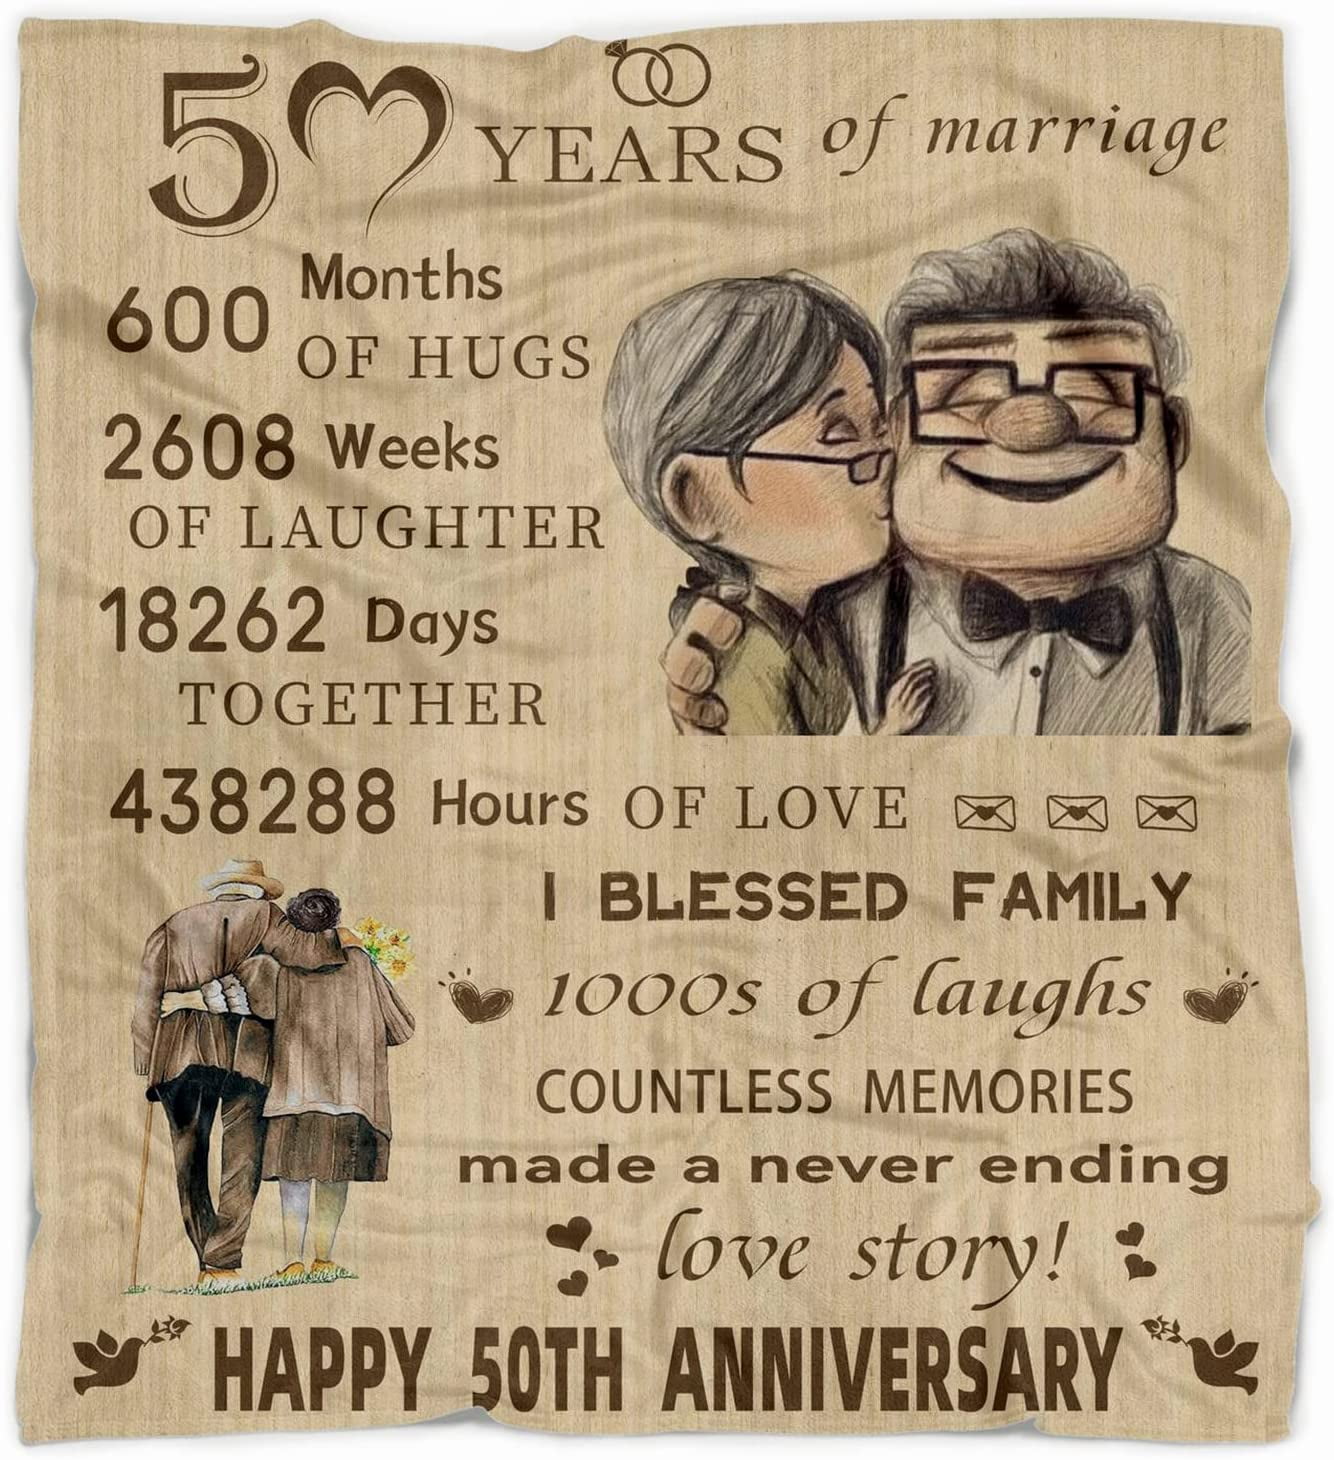 Buy Incredible Gifts India 25th Wedding Anniversary Gift - Personalized  Wooden Engraved Photo in Heart Online at Lowest Price Ever in India | Check  Reviews & Ratings - Shop The World